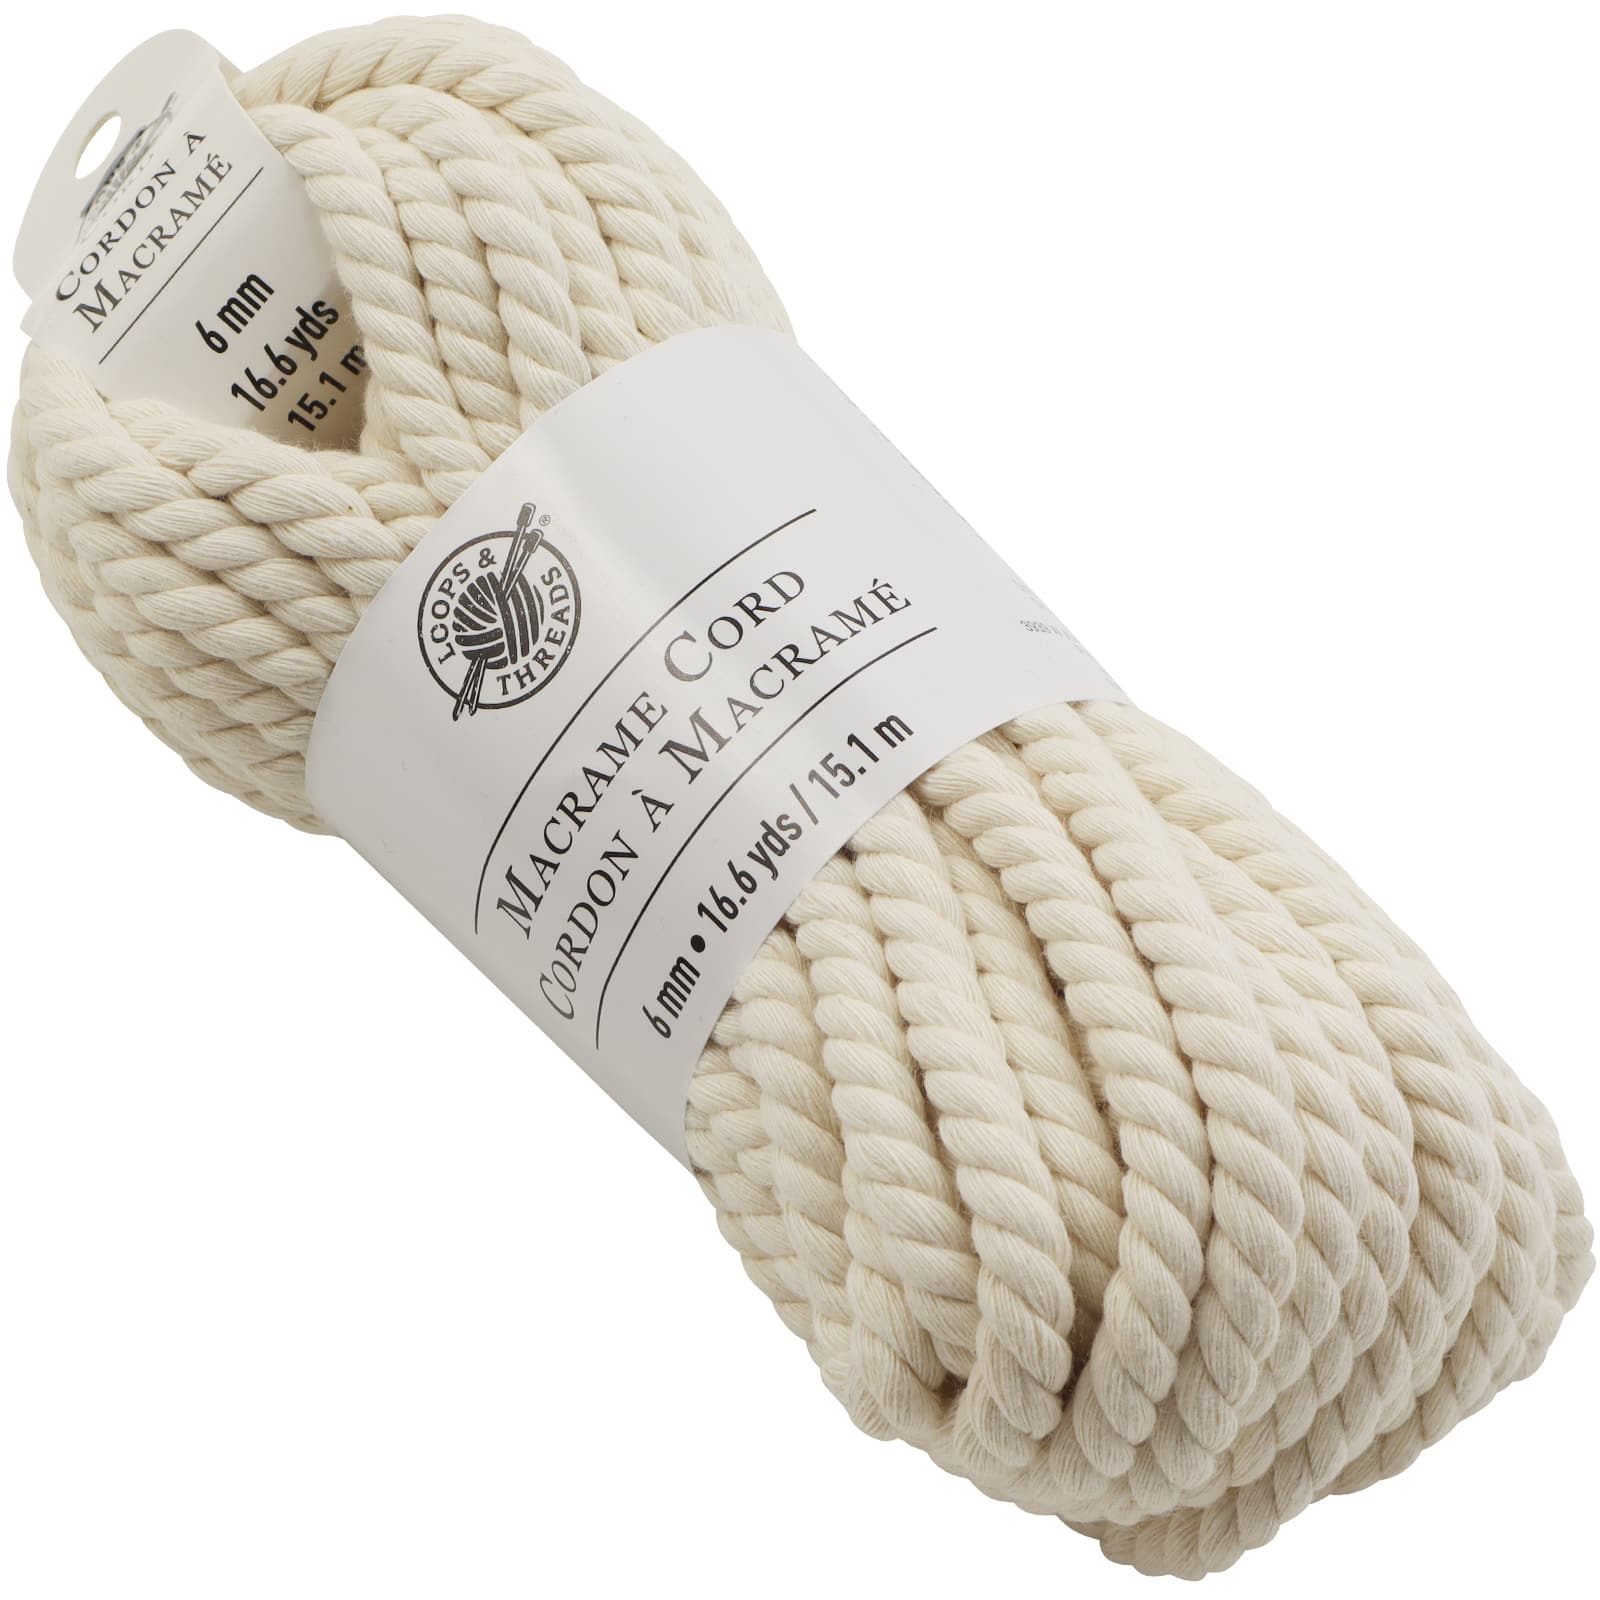 Loops & Threads Macrame Cotton Cord - 16.6 yd